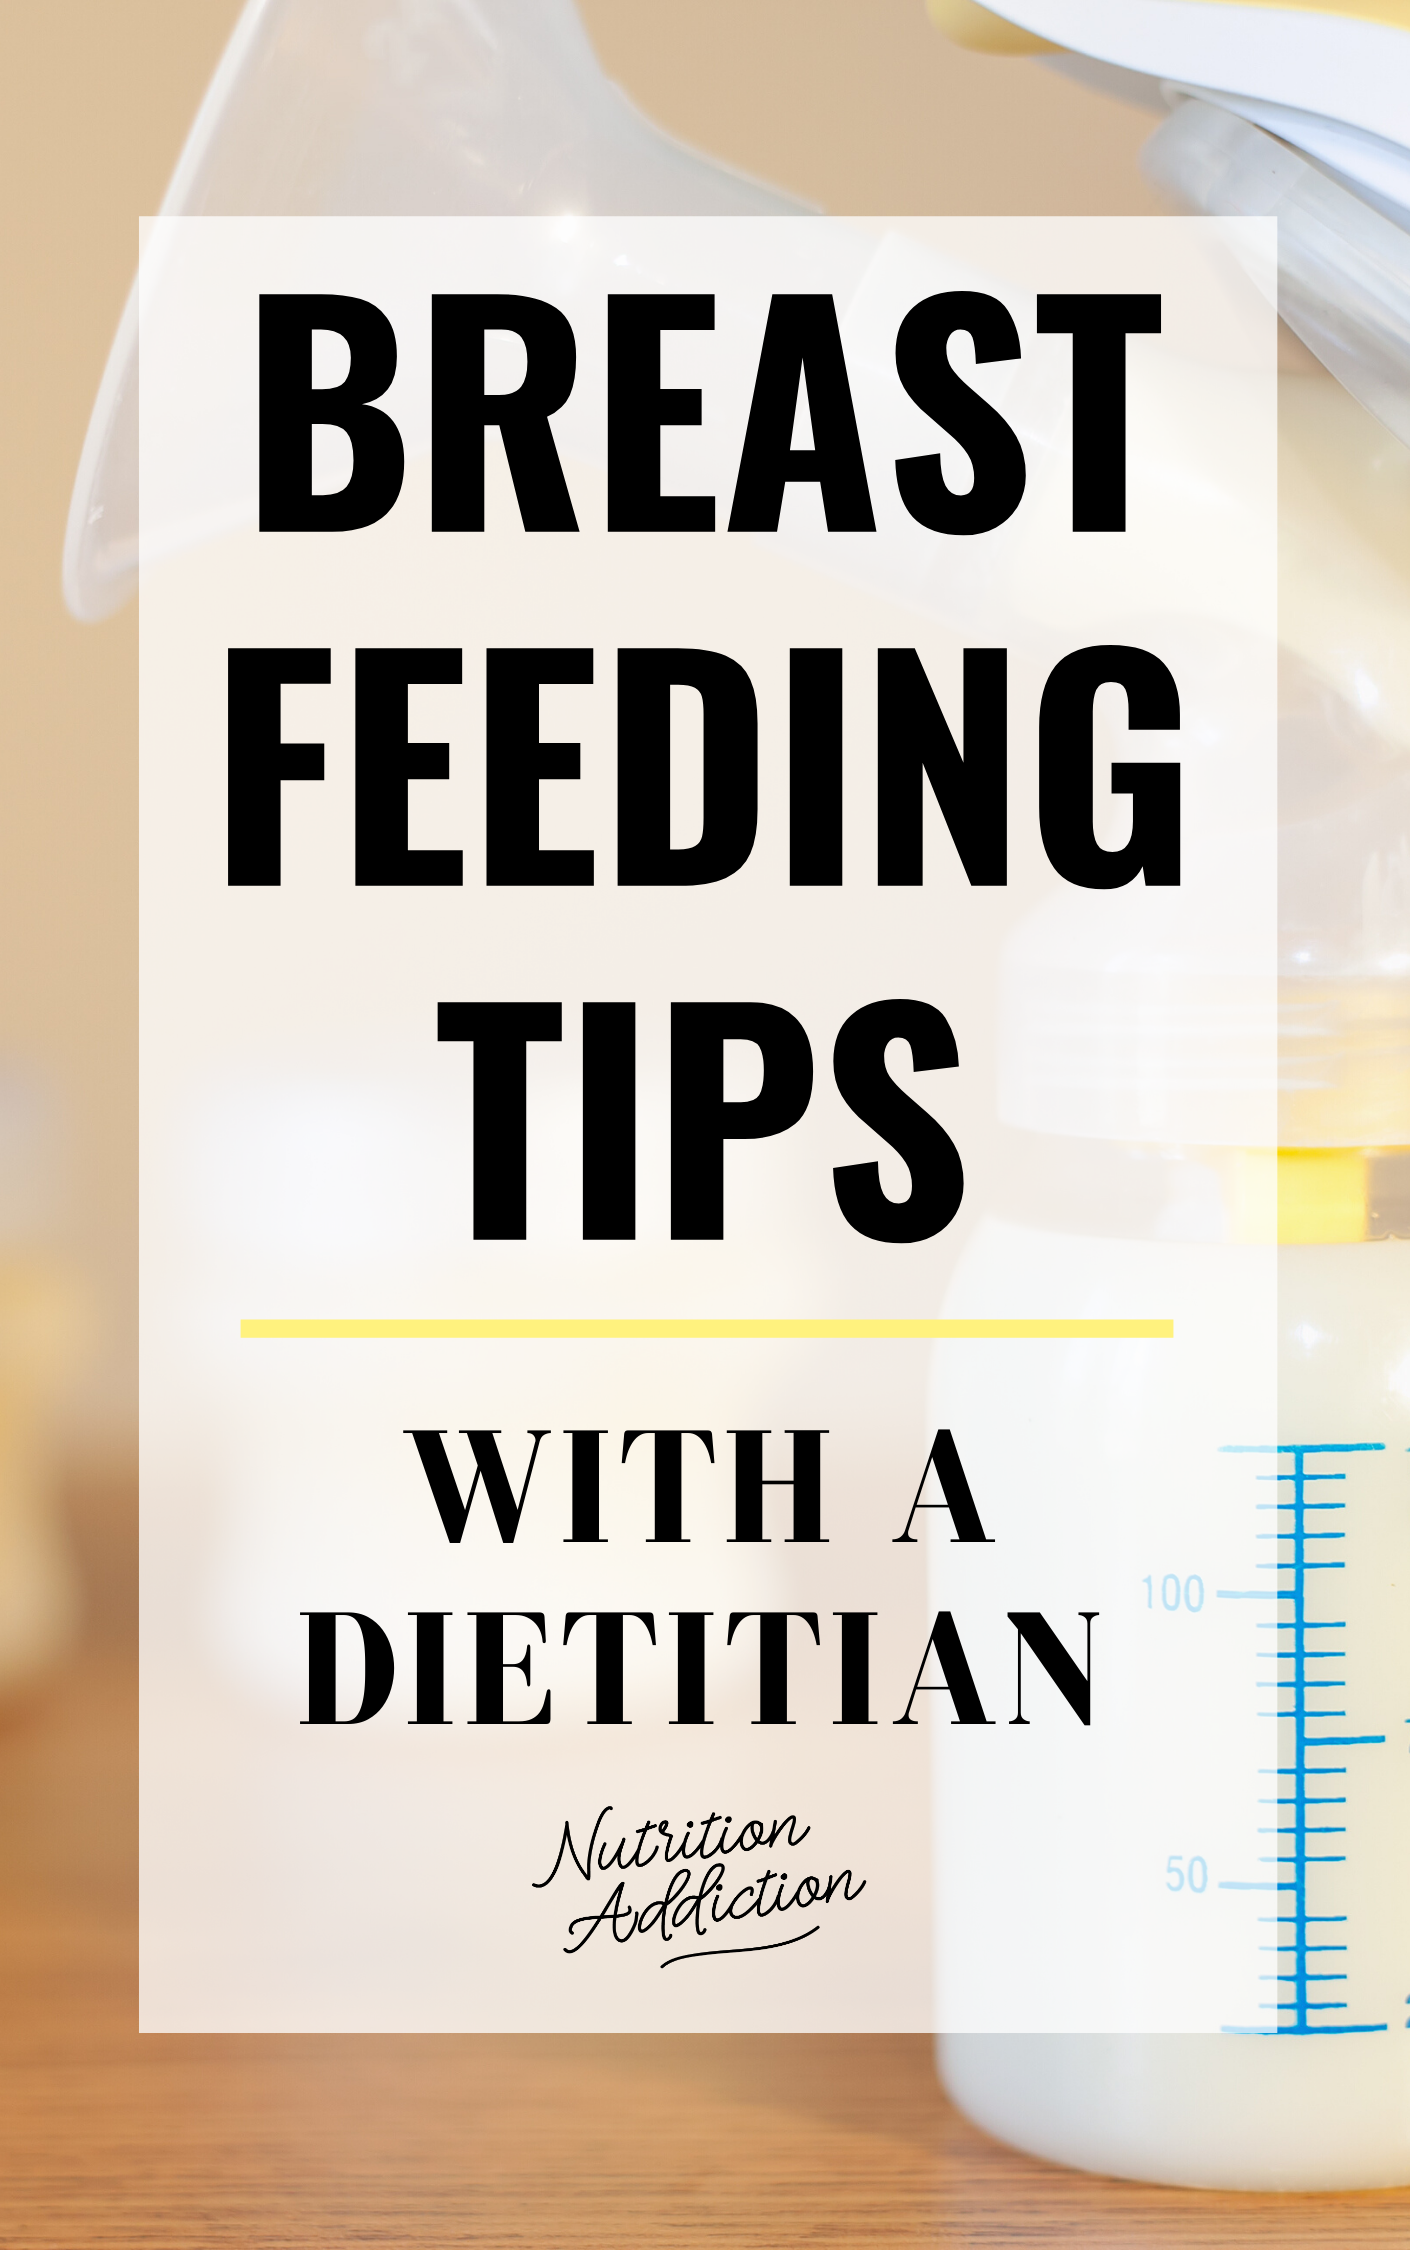 breastfeeding tips with a dietitian